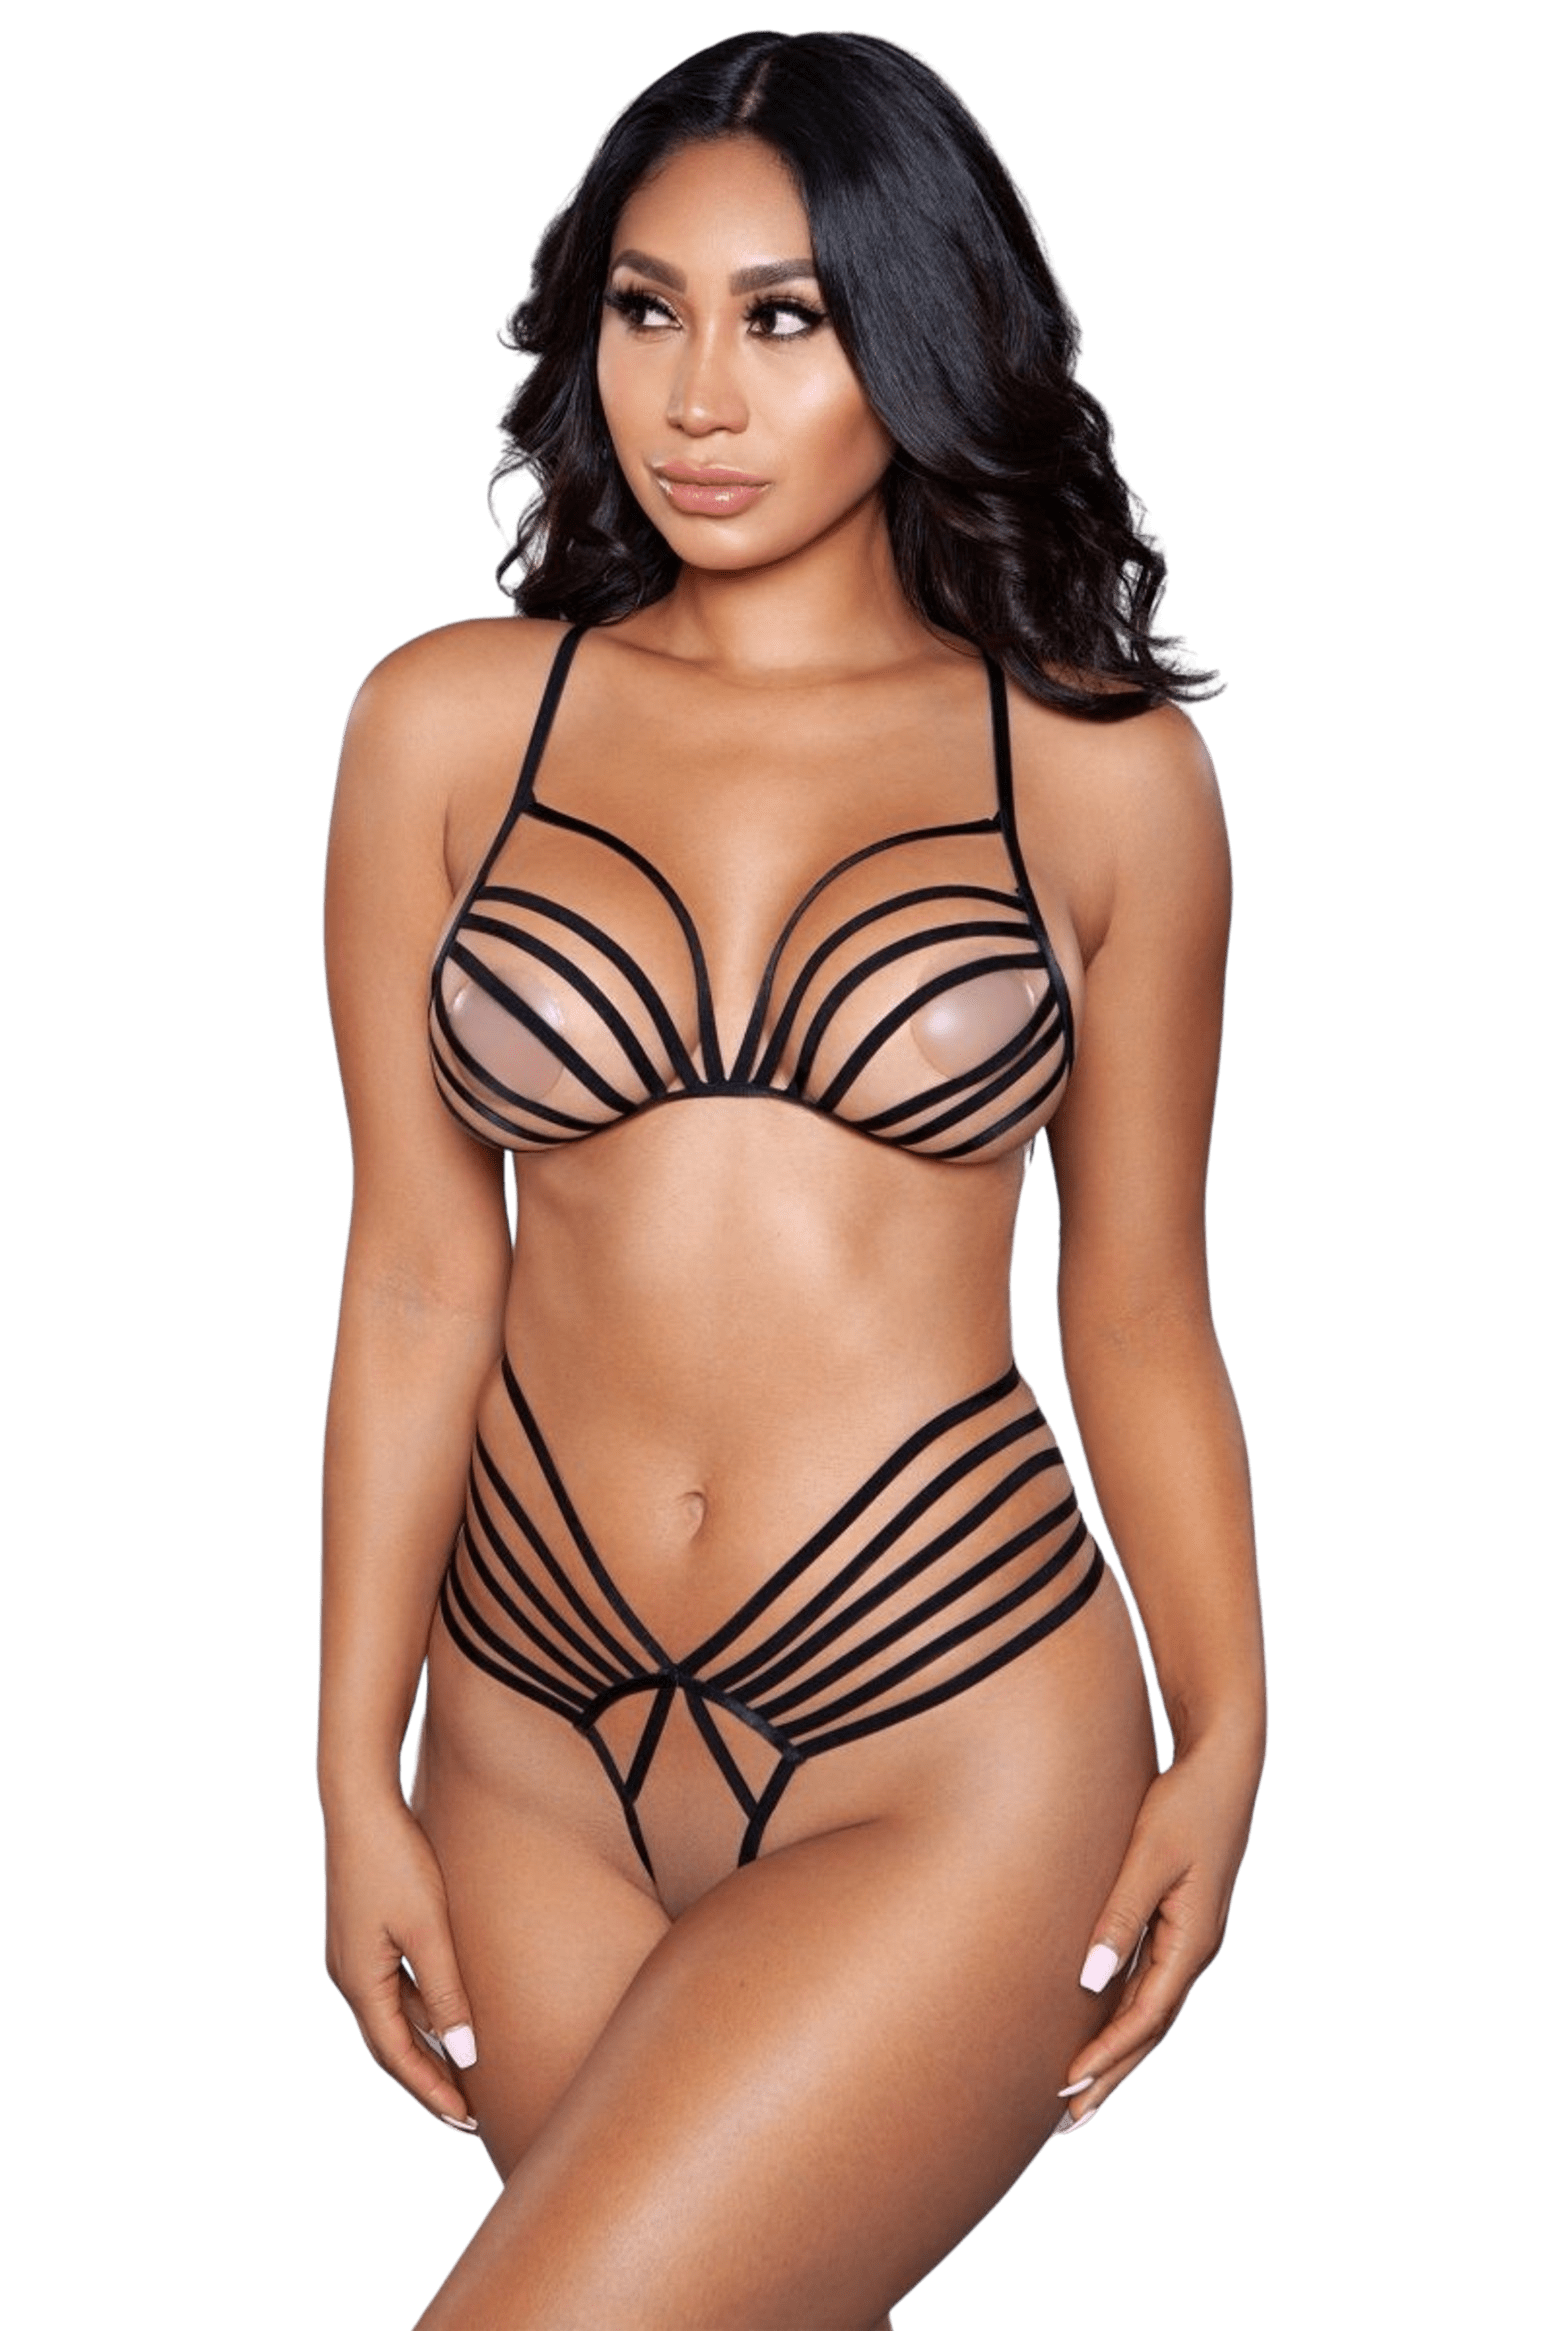 Scandalous Barely There Crotchless Bra Set